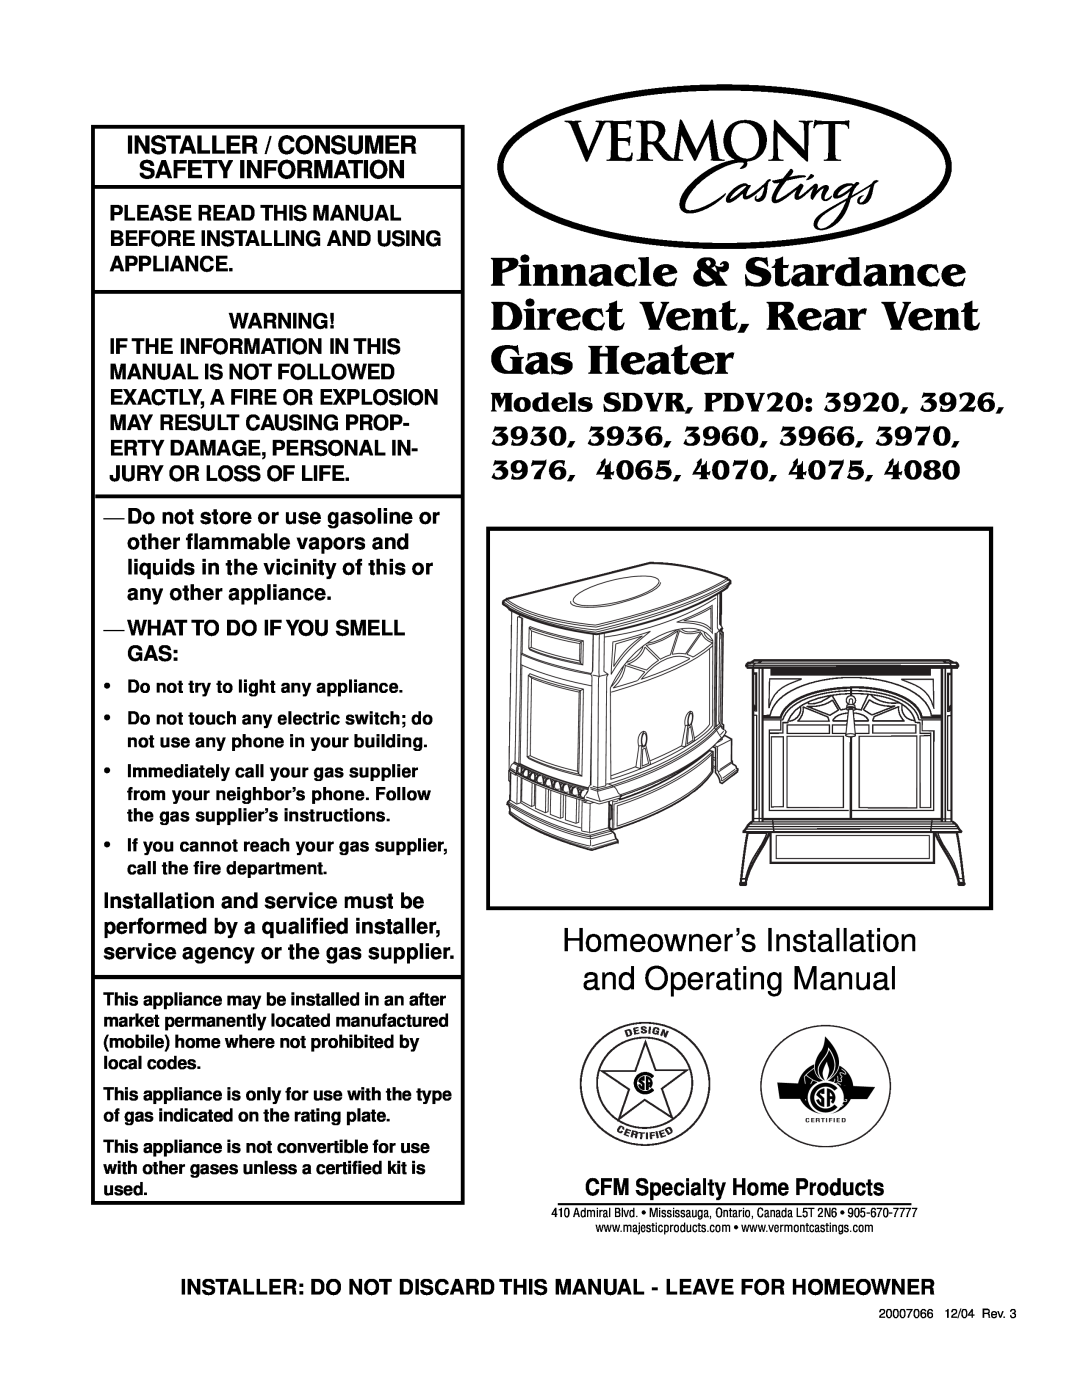 Vermont Casting PDV20: 3920 manual CFM Specialty Home Products, What To Do If You Smell Gas, Models SDVR, PDV20 3920, 3976 